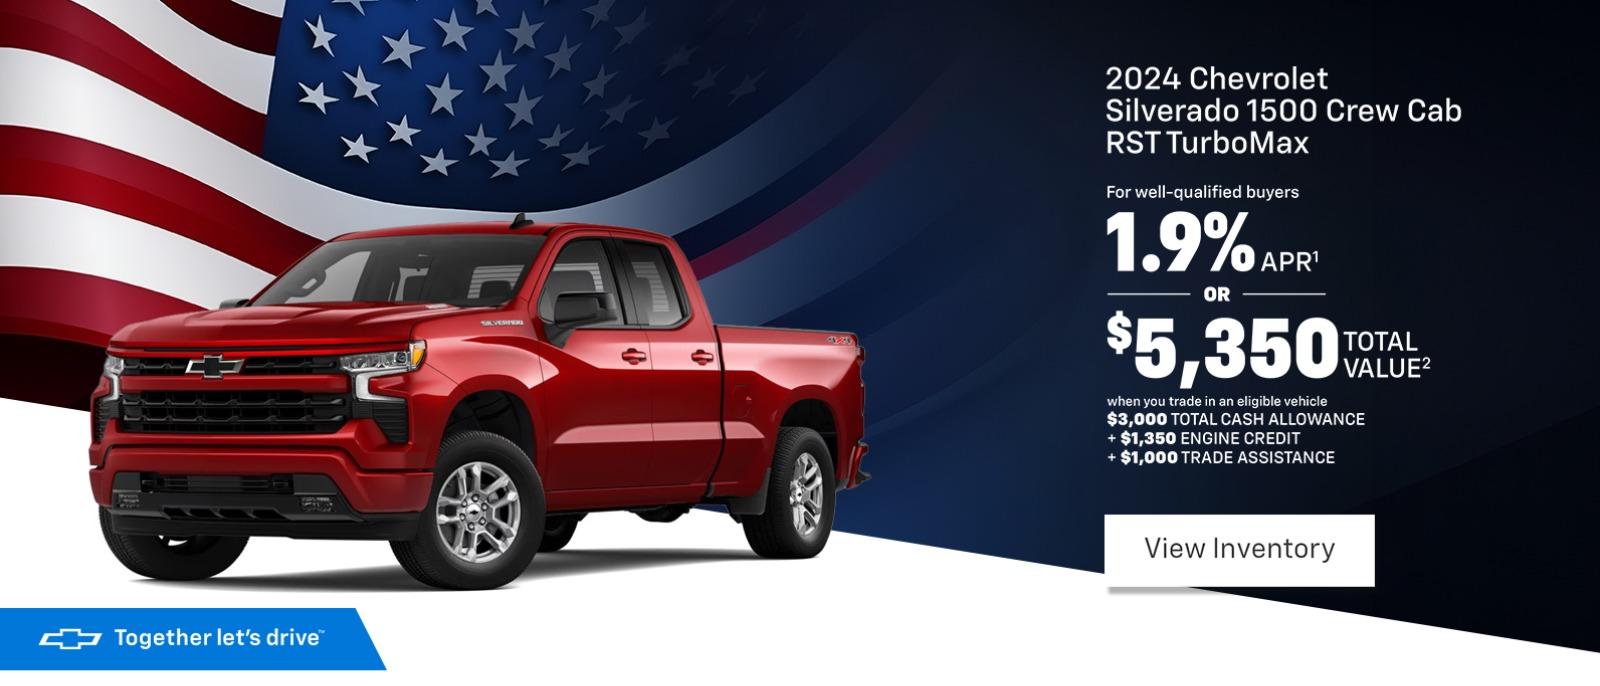 2024 Chevrolet Silverado 1500 Crew Cab RST TurboMax For well-qualified buyers 1.9% APR* OR $5,350 TOTAL VALUE² when you trade in an eligible vehicle $3,000 TOTAL CASH ALLOWANCE + $1,350 ENGINE CREDIT +$1,000 TRADE ASSISTANCE